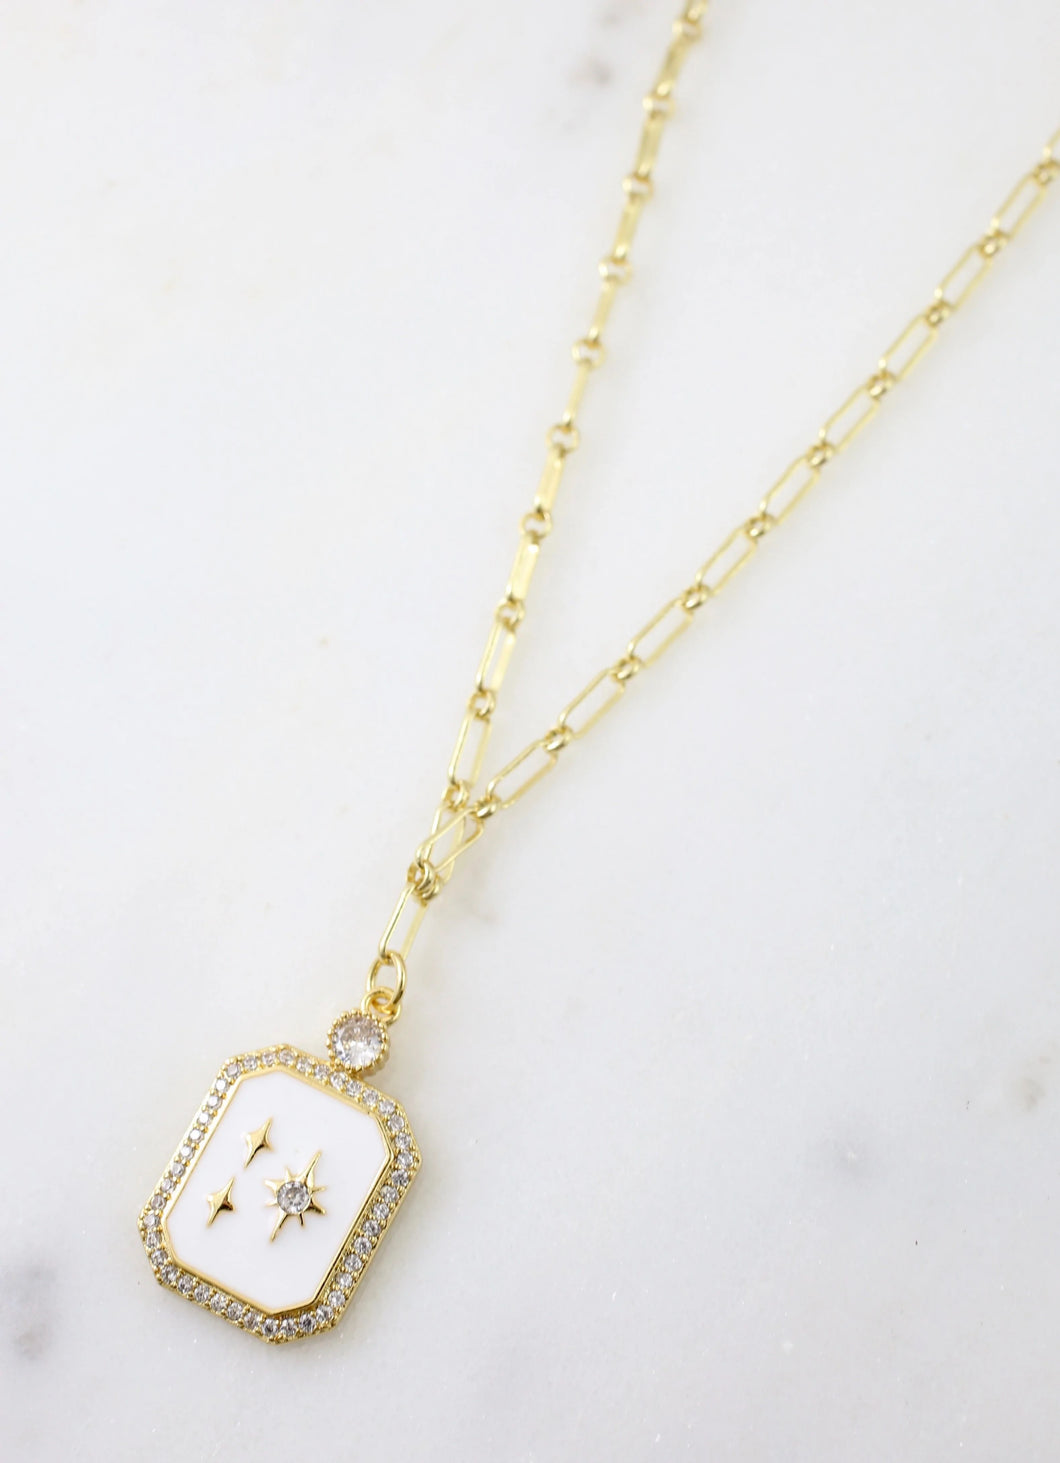 Gold chain necklace with White and gold star pendant